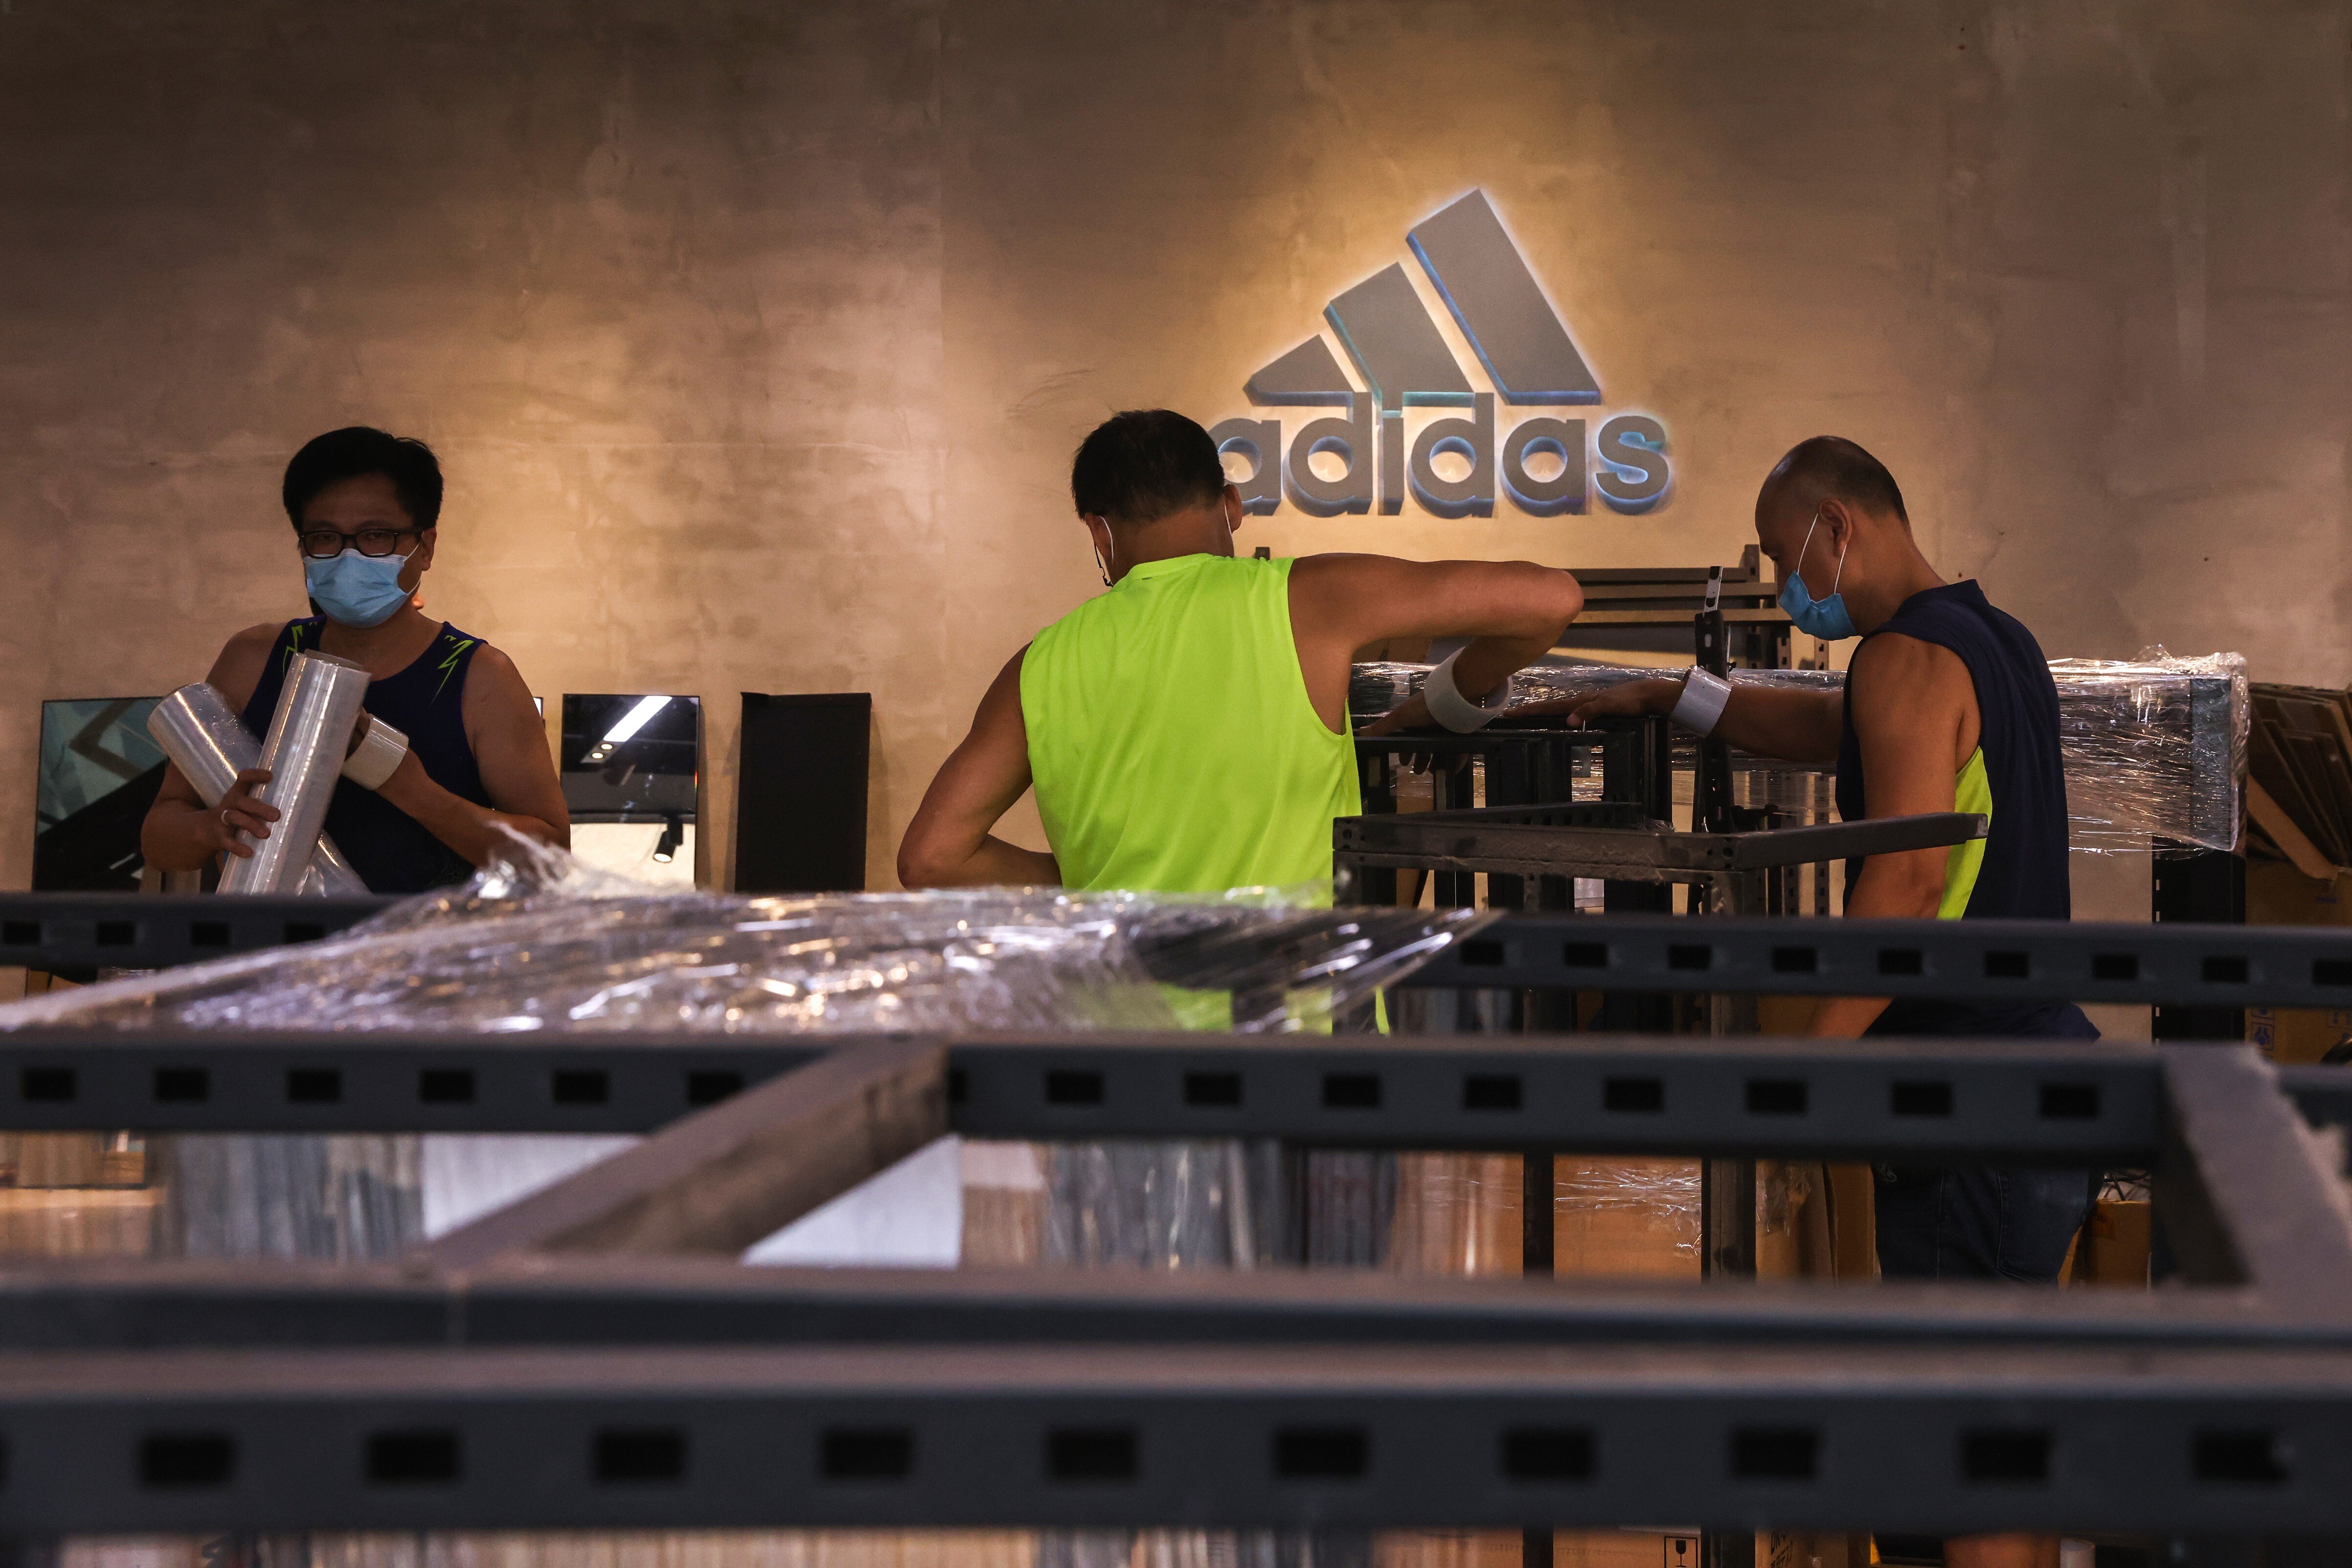 Sales in the Adidas store on Alibaba Group Holding’s Tmall – China’s largest business-to-consumer e-commerce platform – slumped by 78 per cent in April. Photo: SCMP